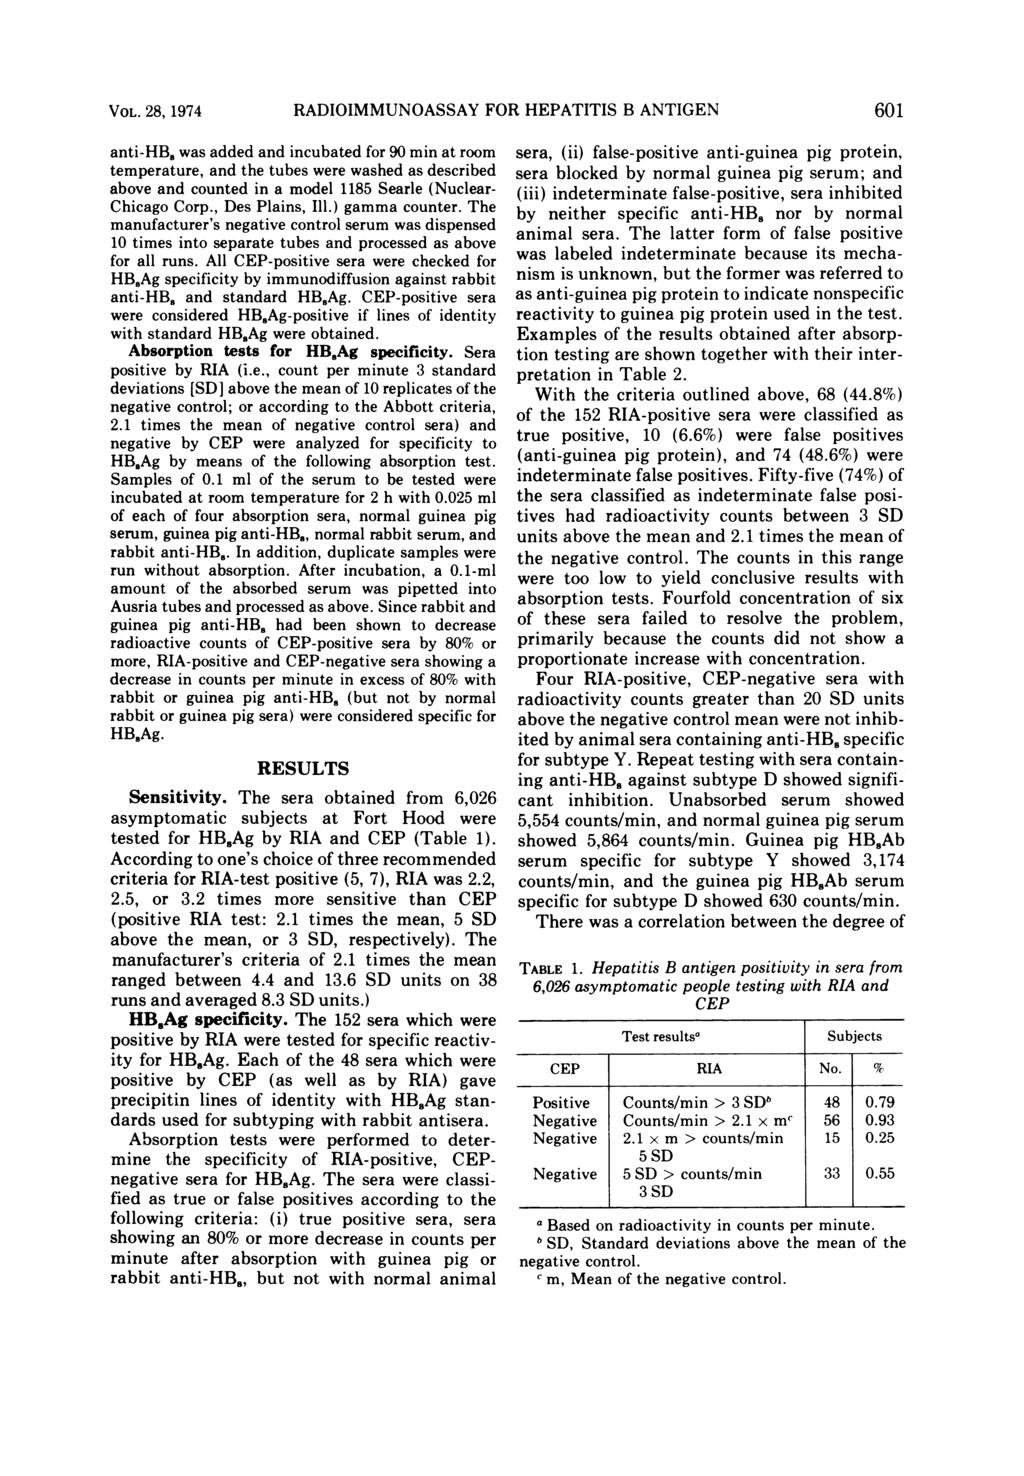 VOL. 28, 1974 RADIOIMMUNOASSAY FOR HEPATITIS B ANTIGEN anti-hb, was added and incubated for 90 min at room temperature, and the tubes were washed as described above and counted in a model 1185 Searle